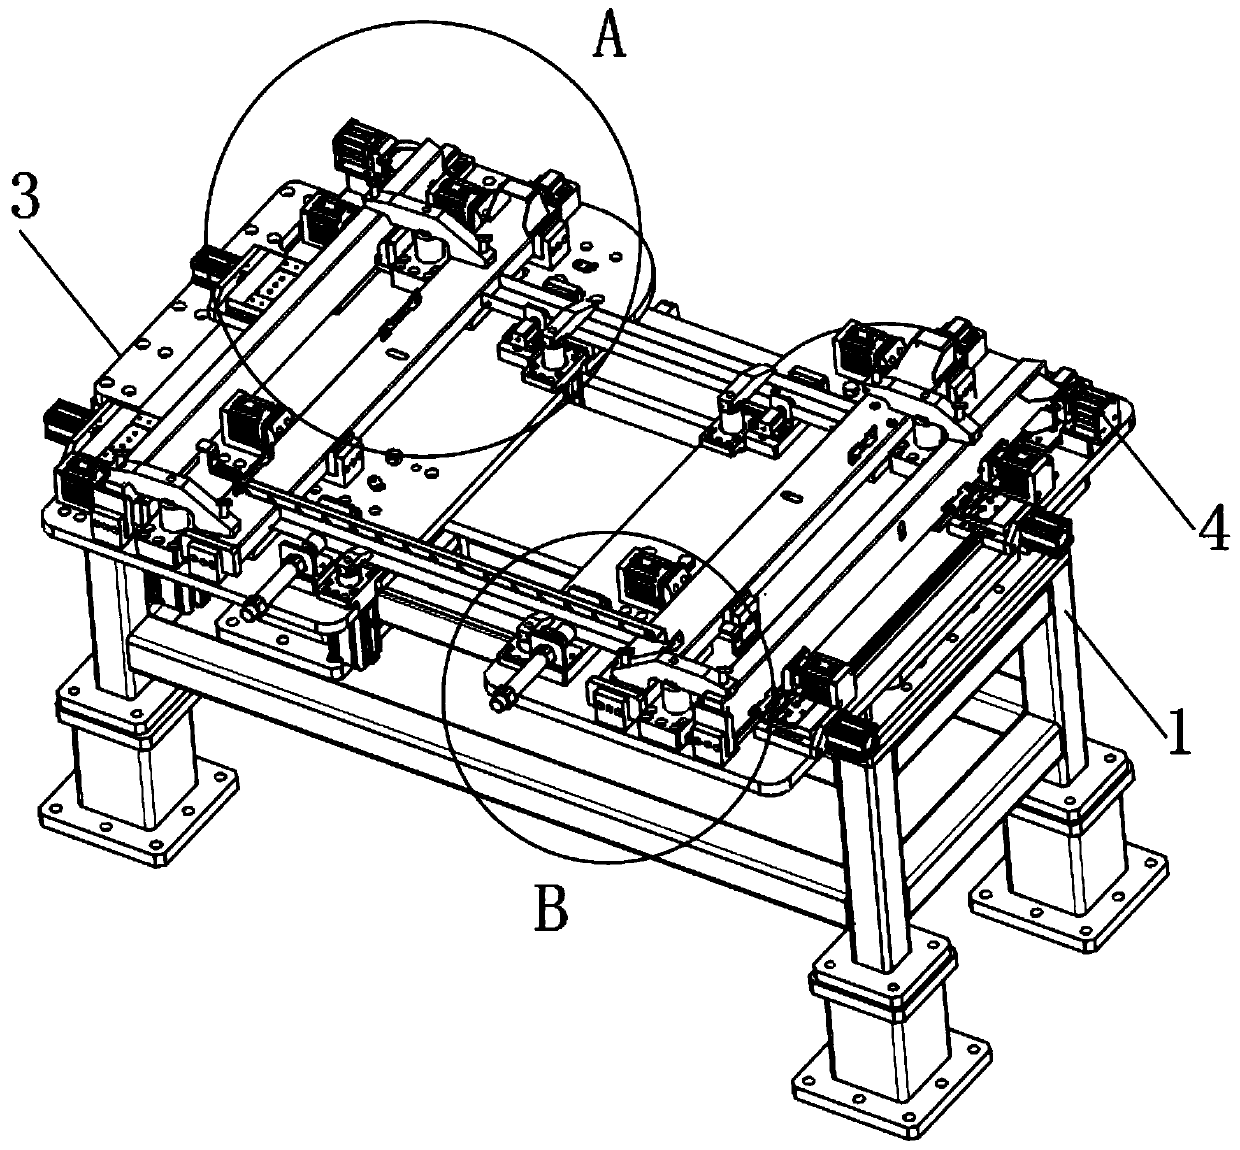 An assembly protection device for an electronic product shell frame